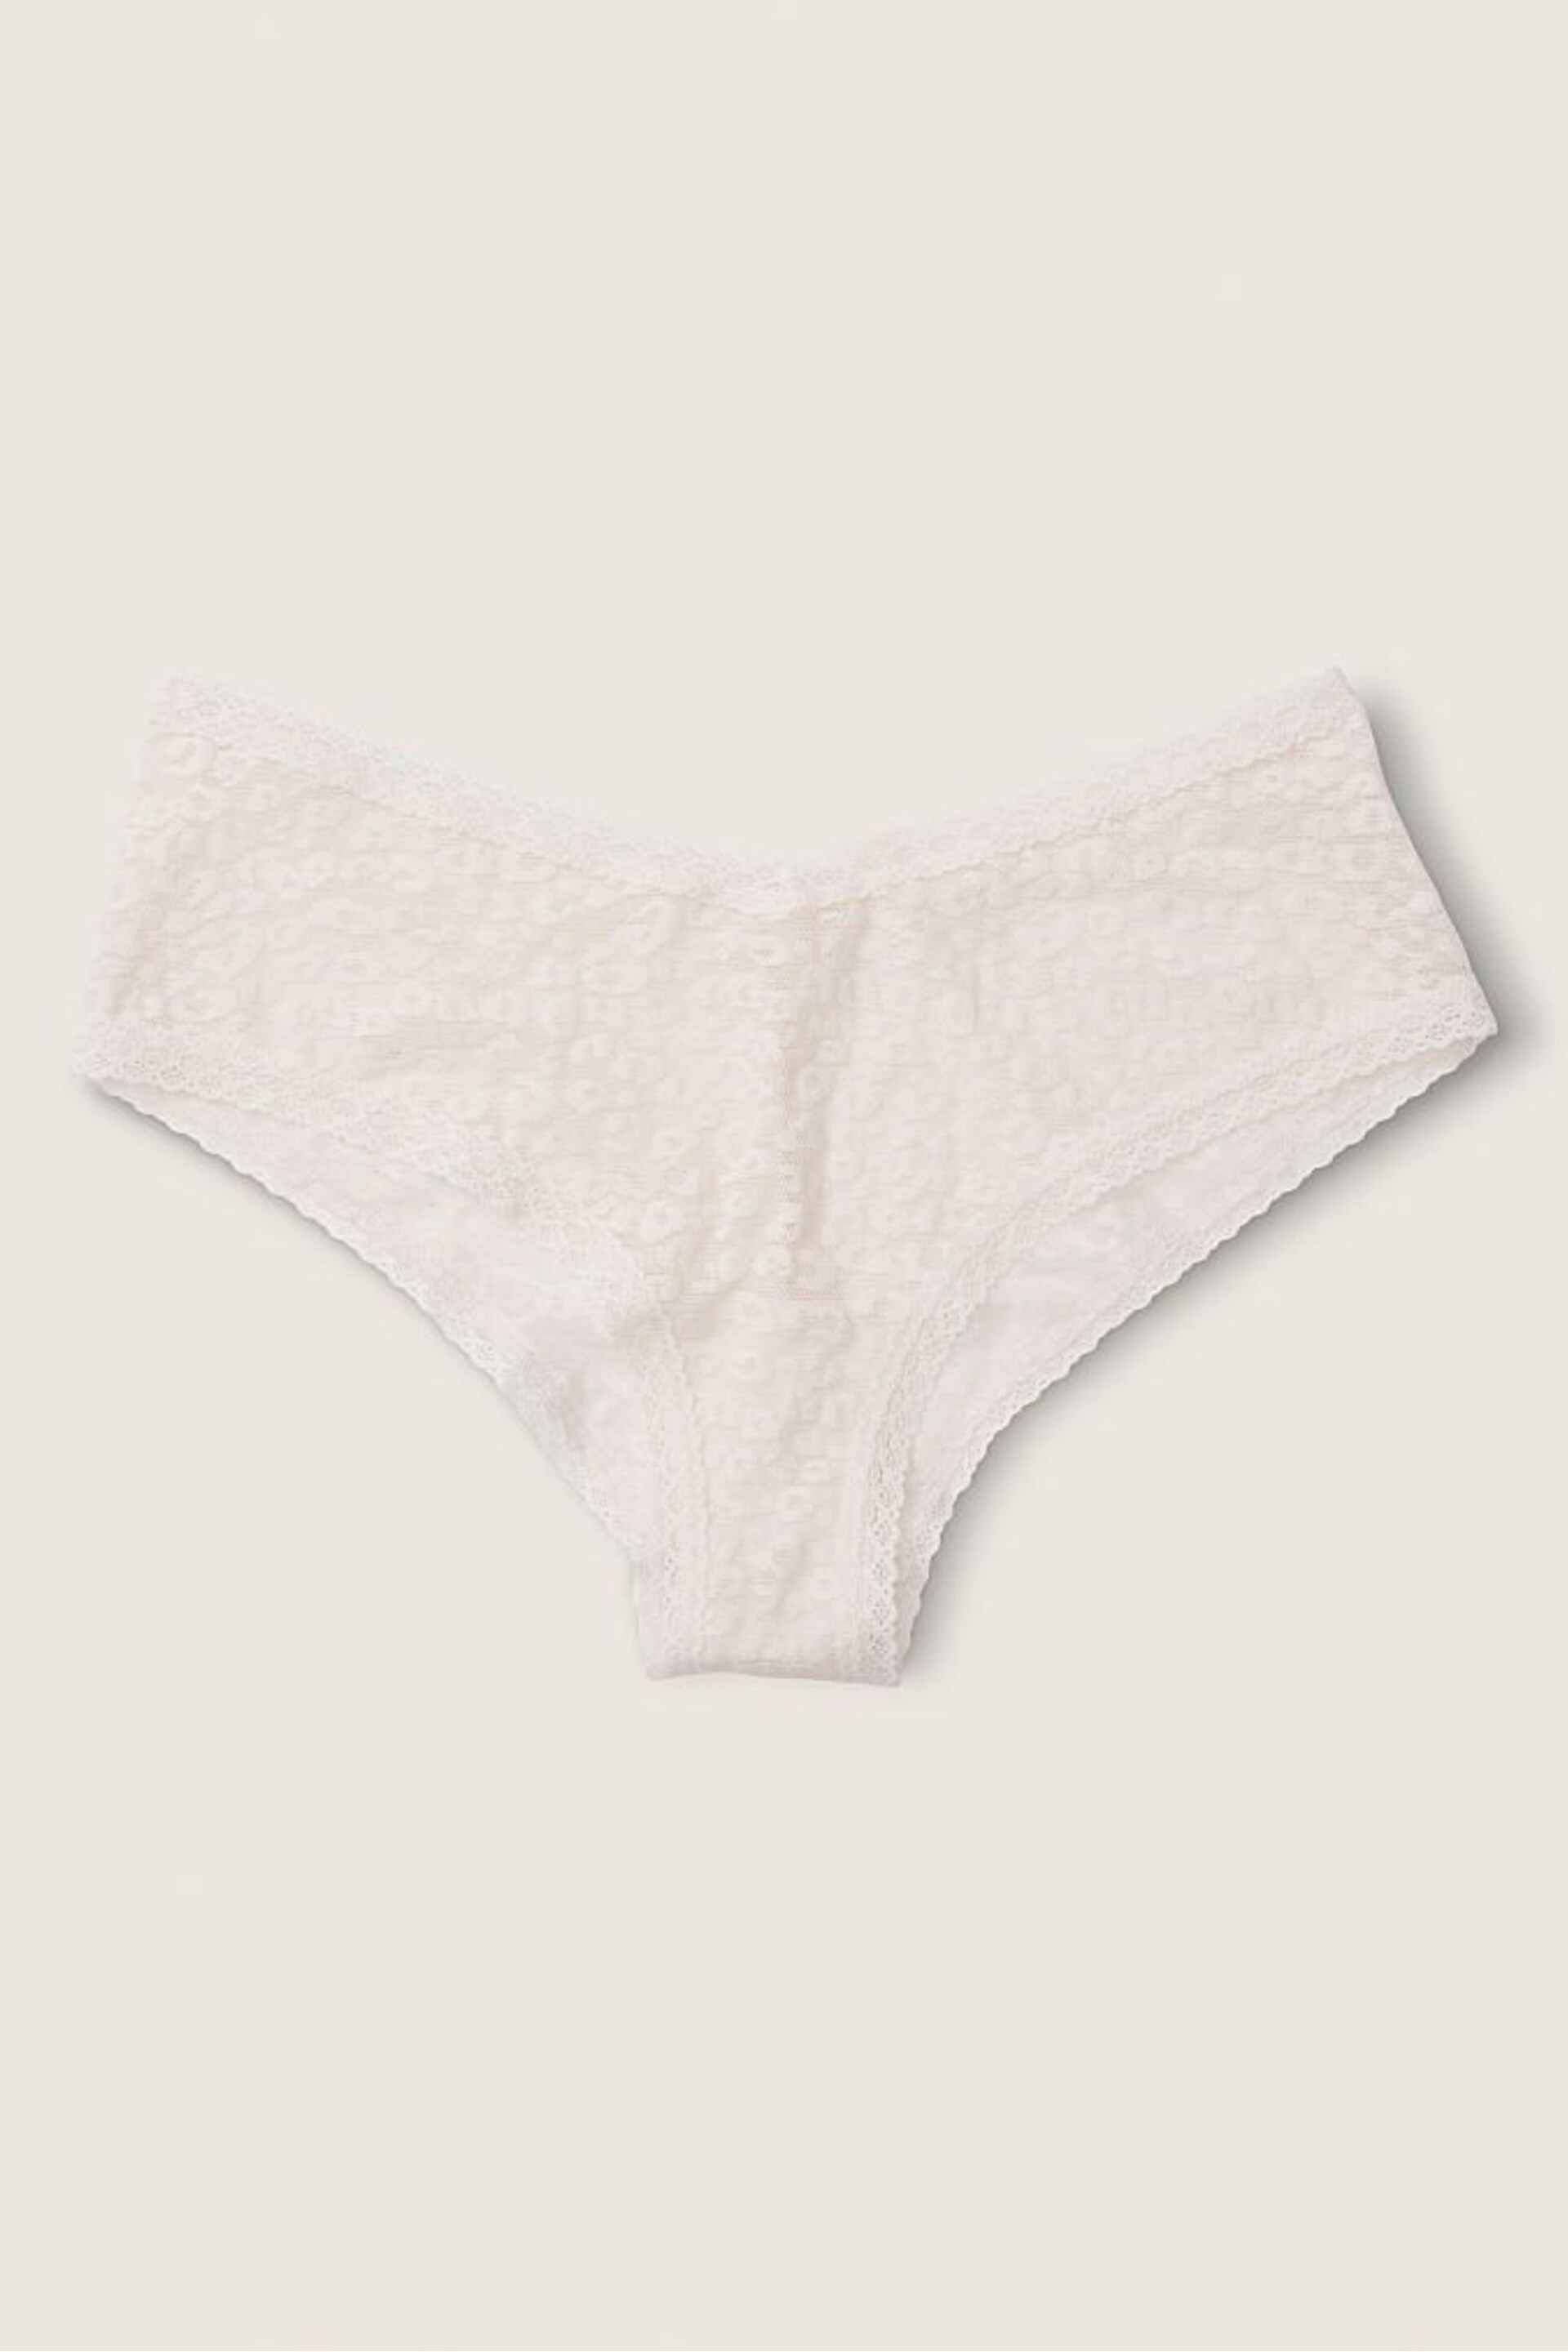 Victoria's Secret PINK Coconut White Lace Logo Cheeky Knickers - Image 1 of 2